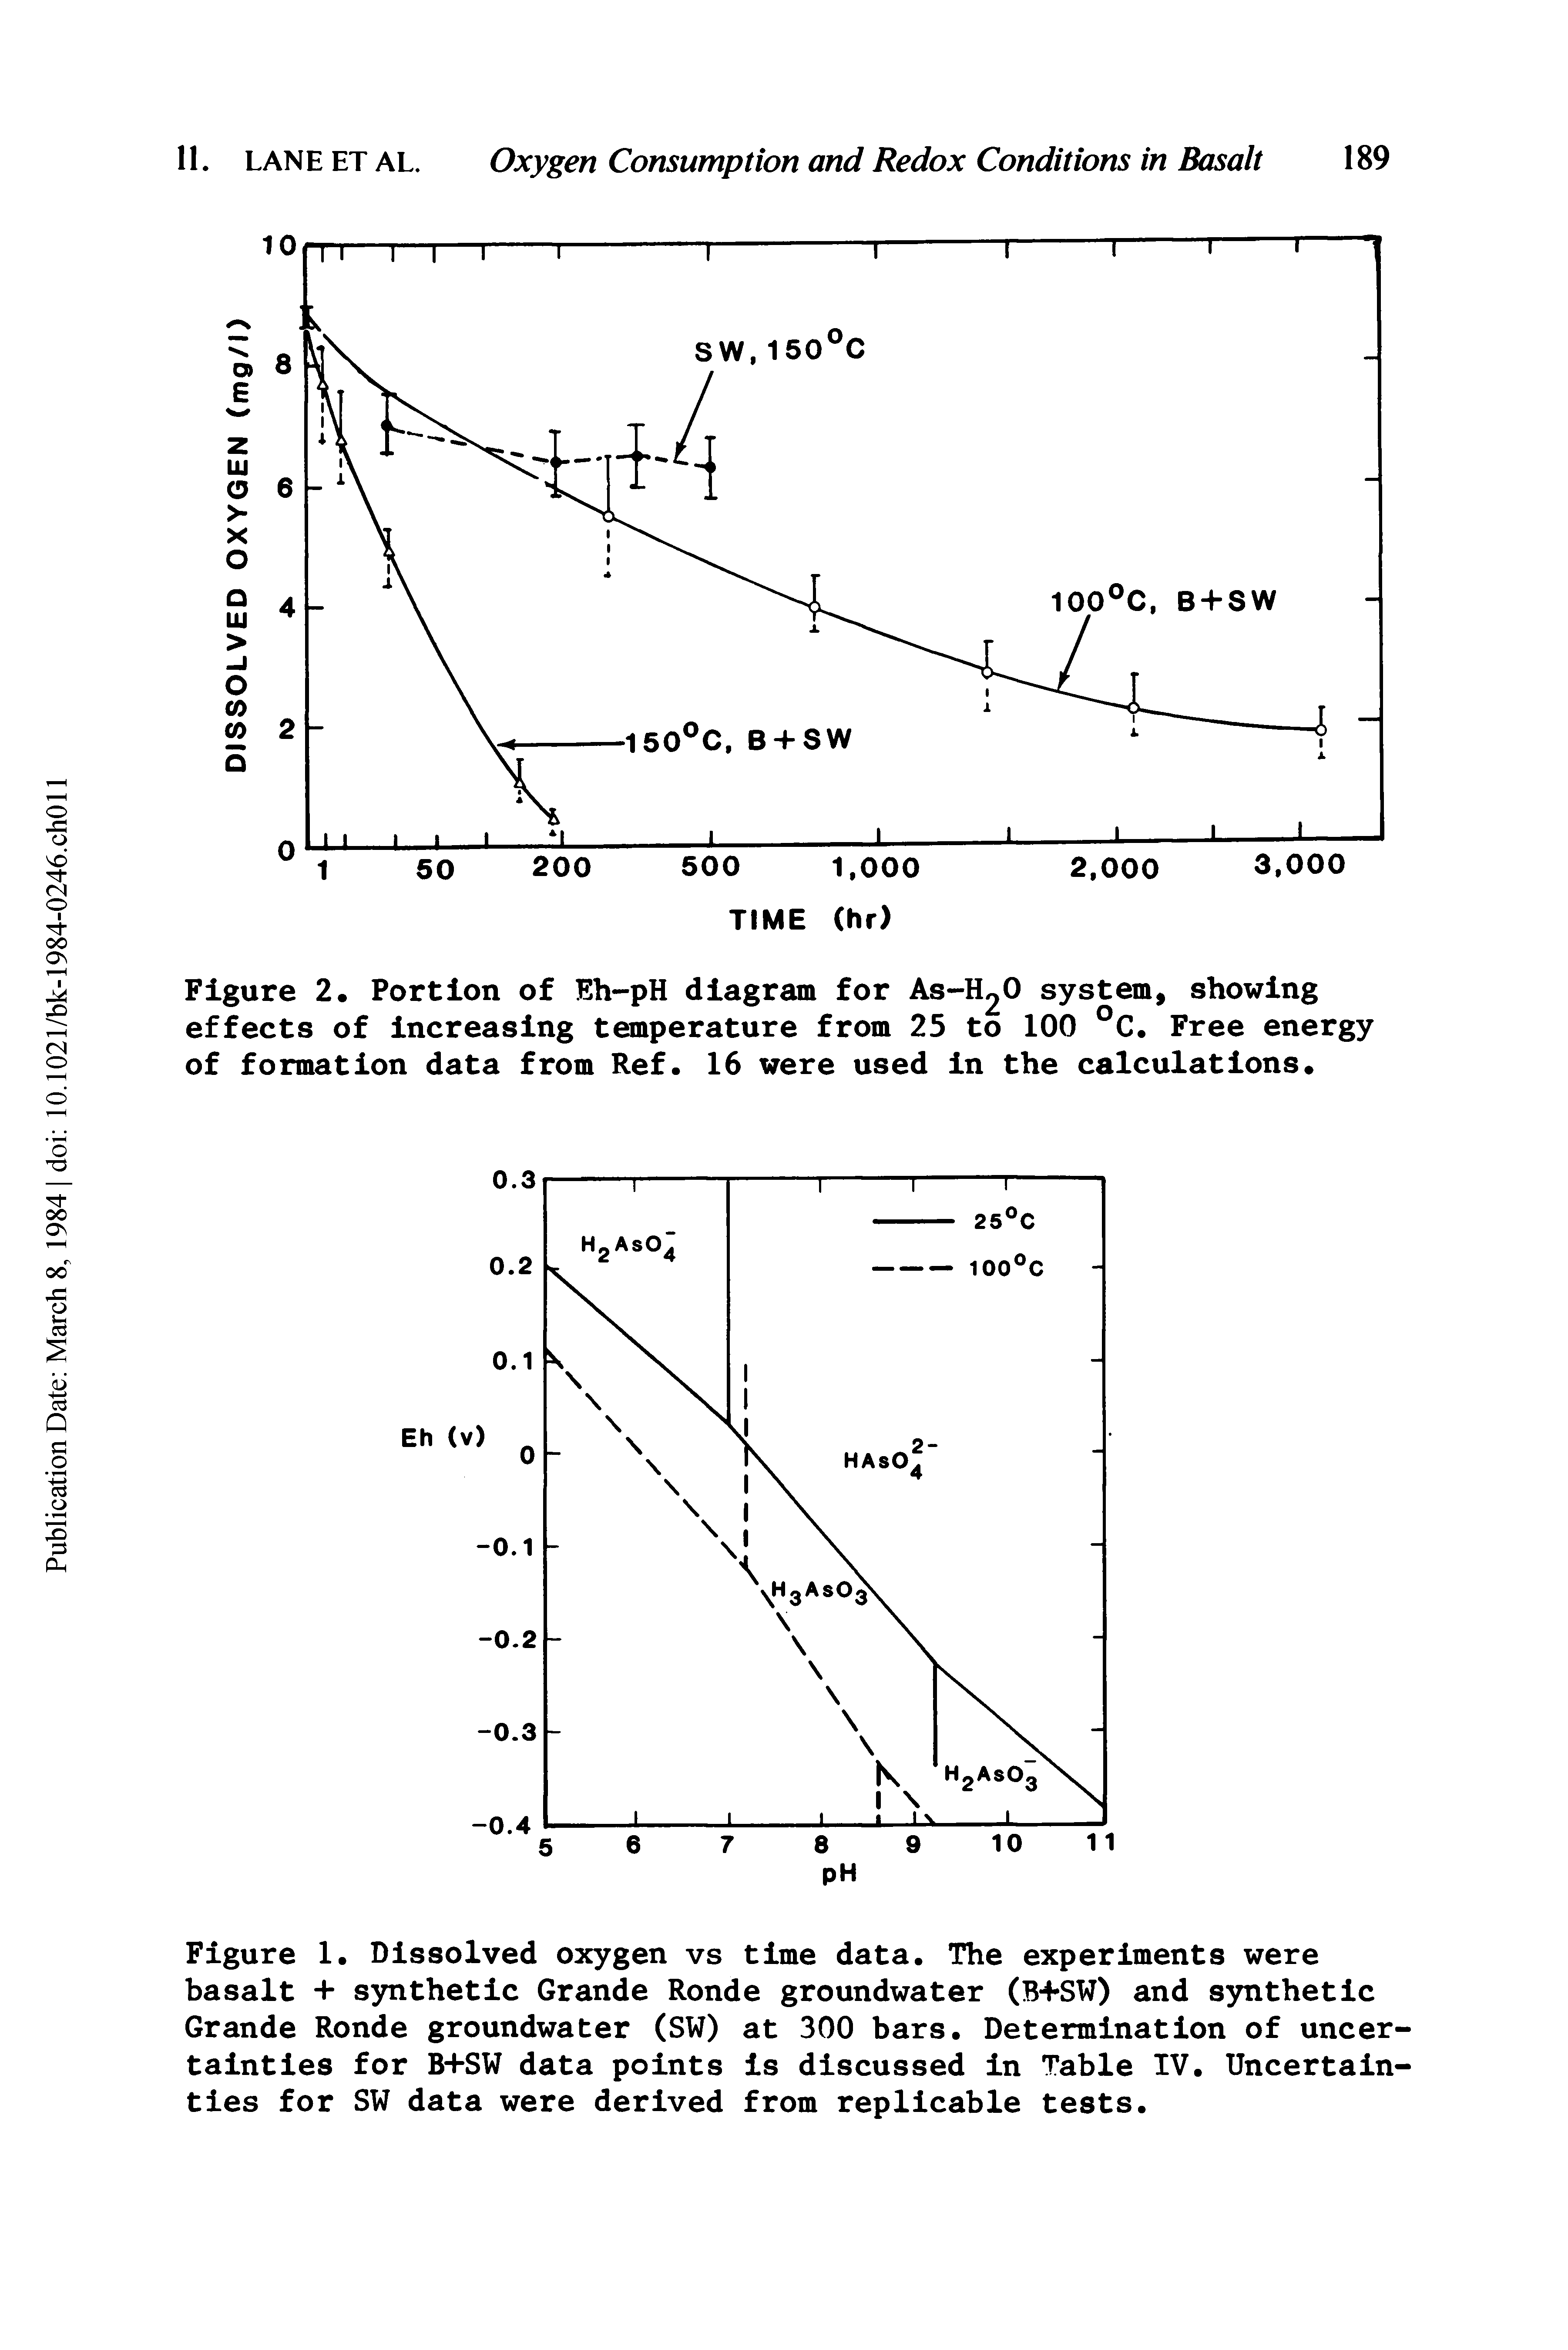 Figure 2. Portion of Eh-pH diagram for As-I O system, showing effects of increasing temperature from 25 to 100 °C. Free energy of formation data from Ref. 16 were used in the calculations.